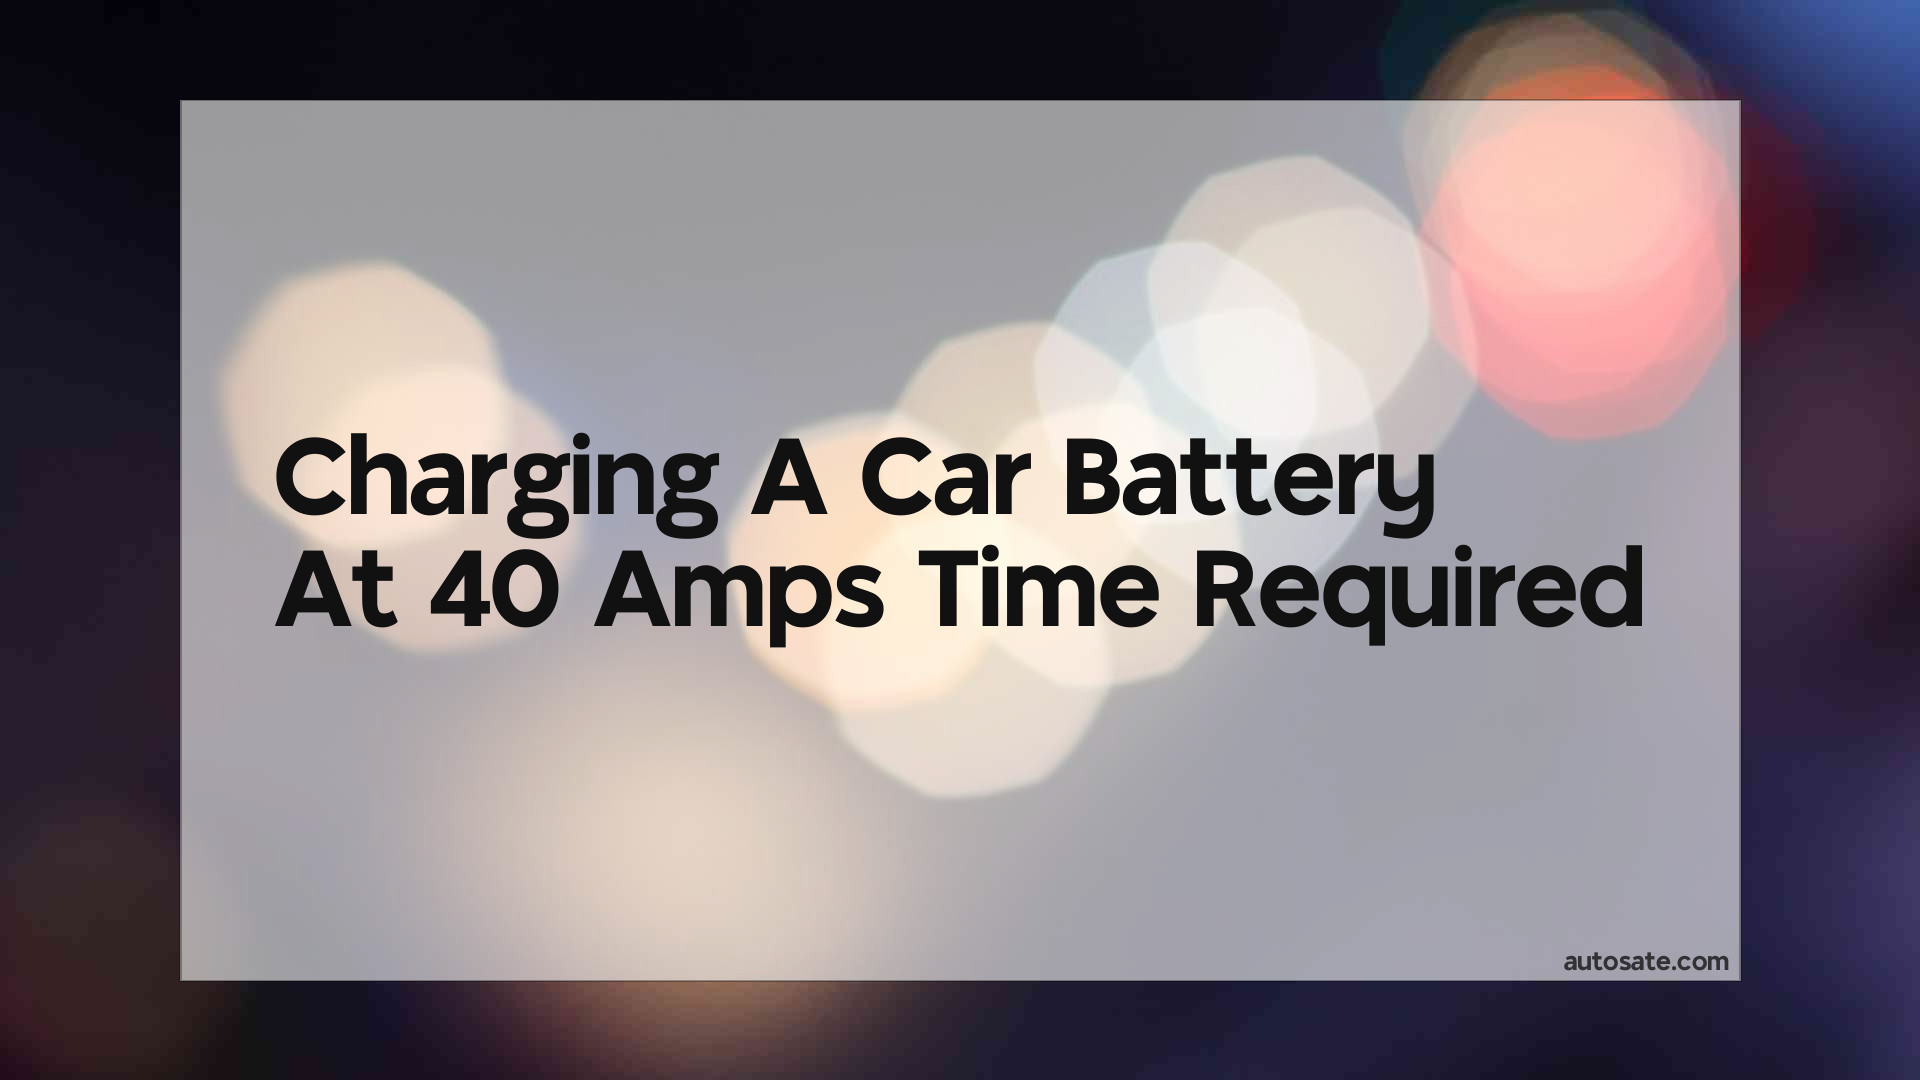 Charging A Car Battery At 40 Amps Time Required